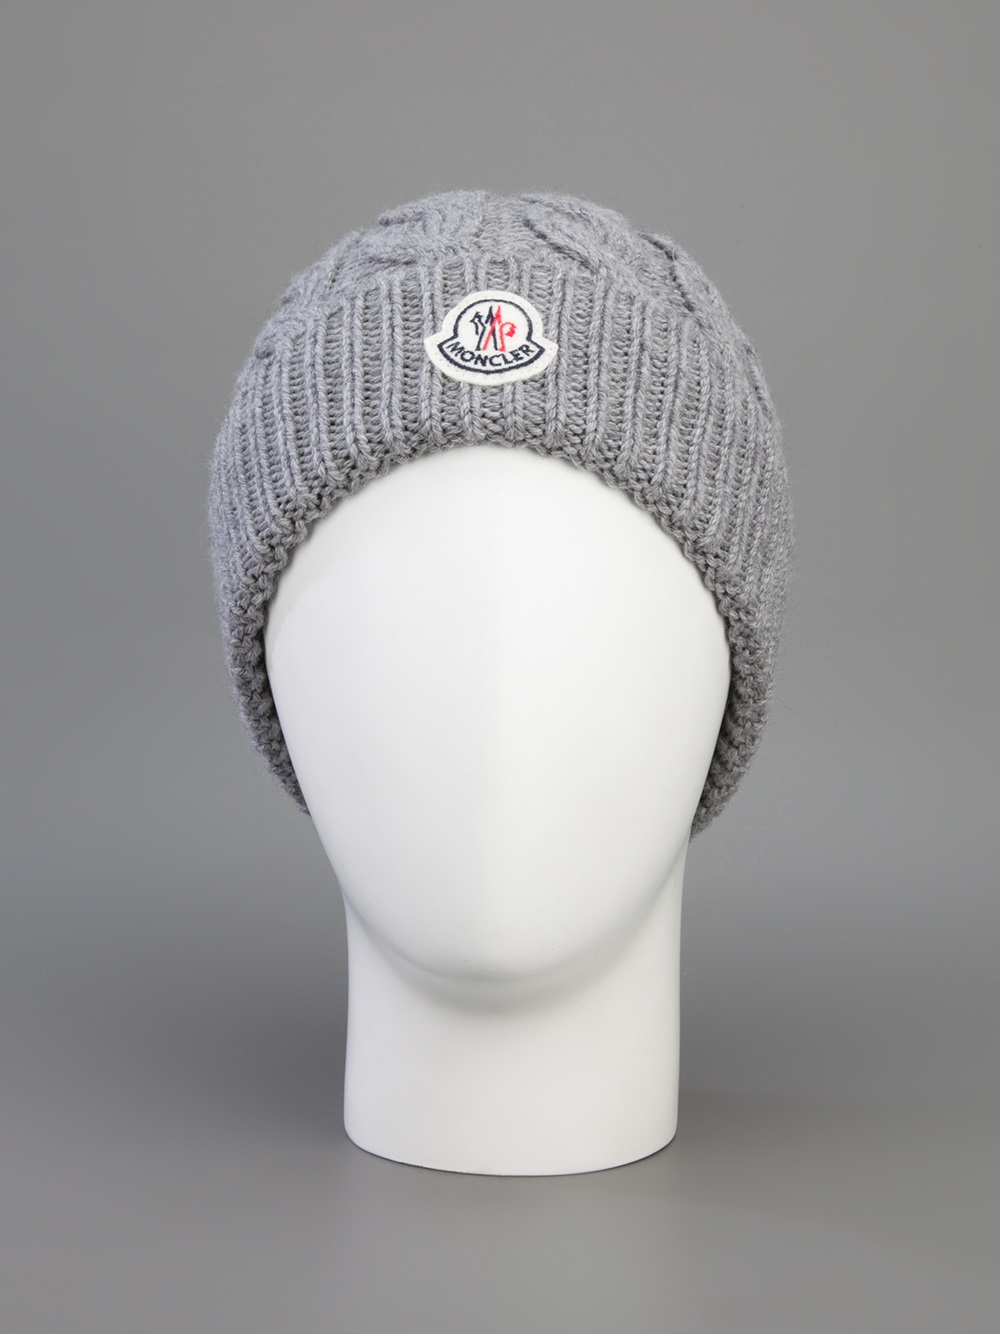 Lyst - Moncler Cable Knit Beanie Hat in Gray for Men